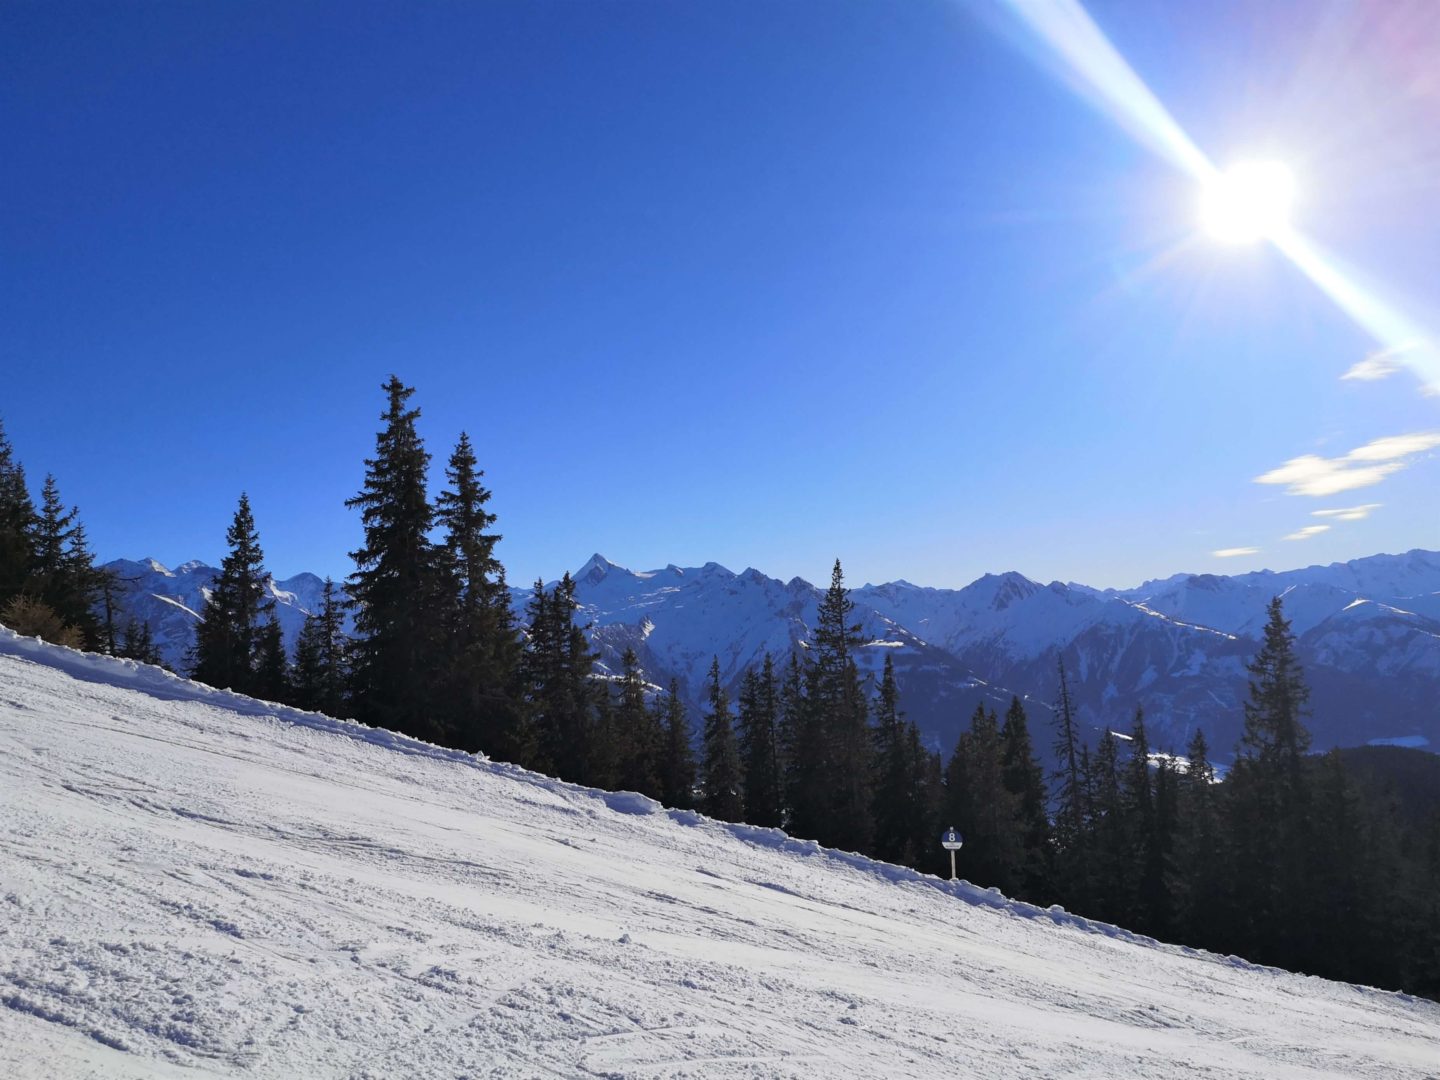 A ski slope with trees and mountain peaks in the background. A clear blue sky can be seen with the sun shining. 